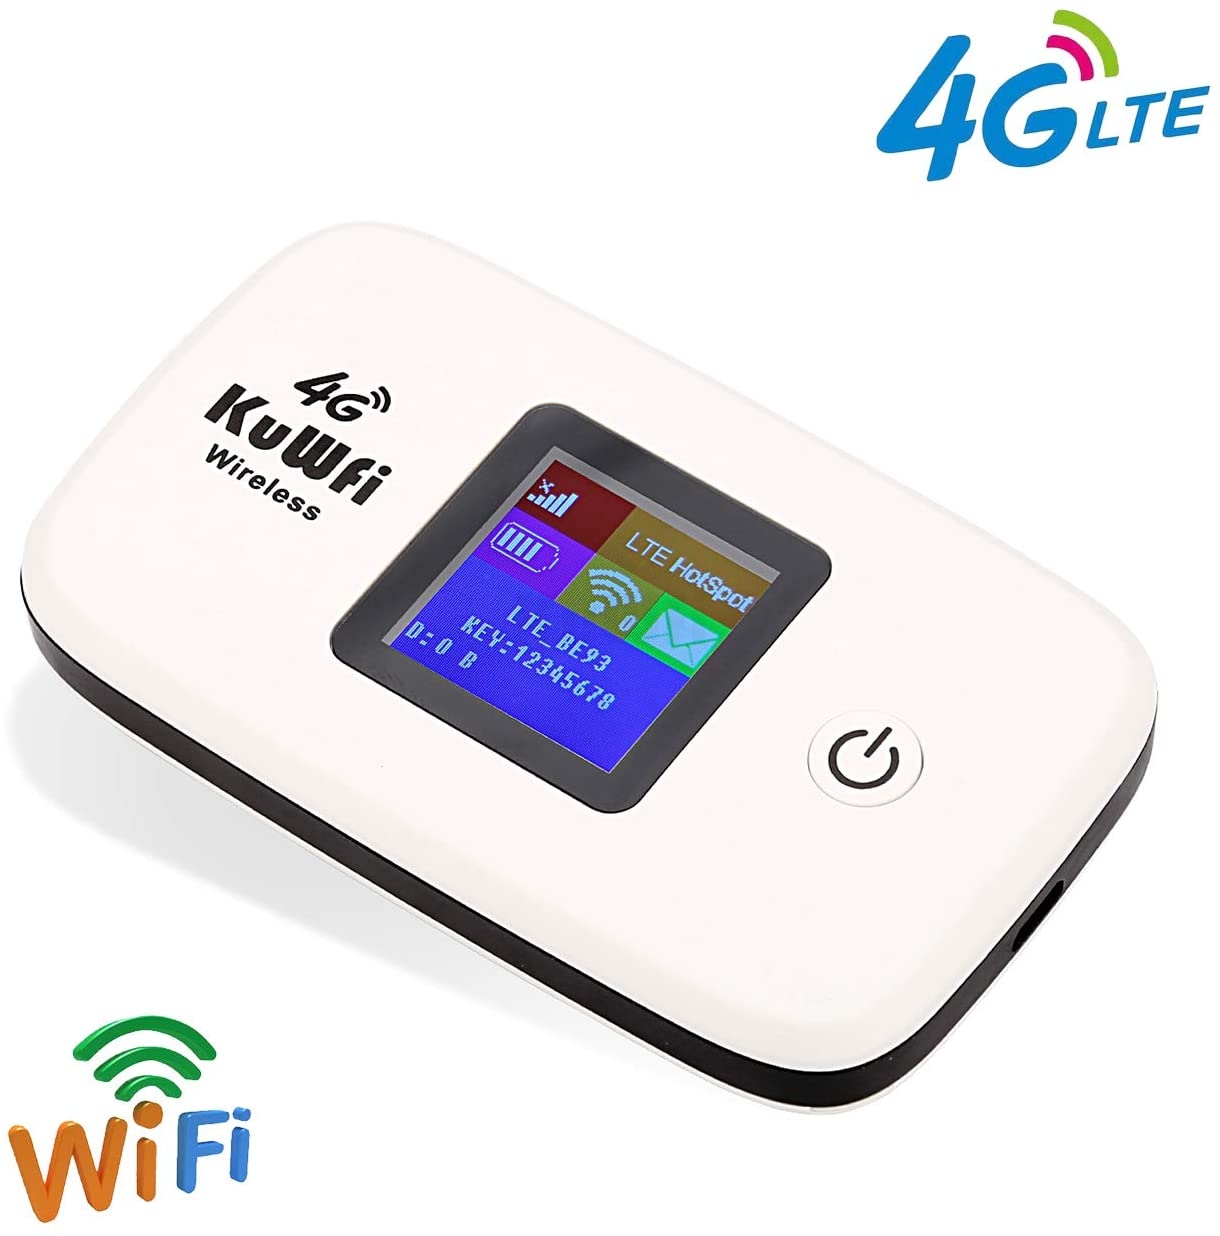 4g Mifi Pocket Wifi Routeur 150mbps Wifi Modem Voiture Mobile Wifi